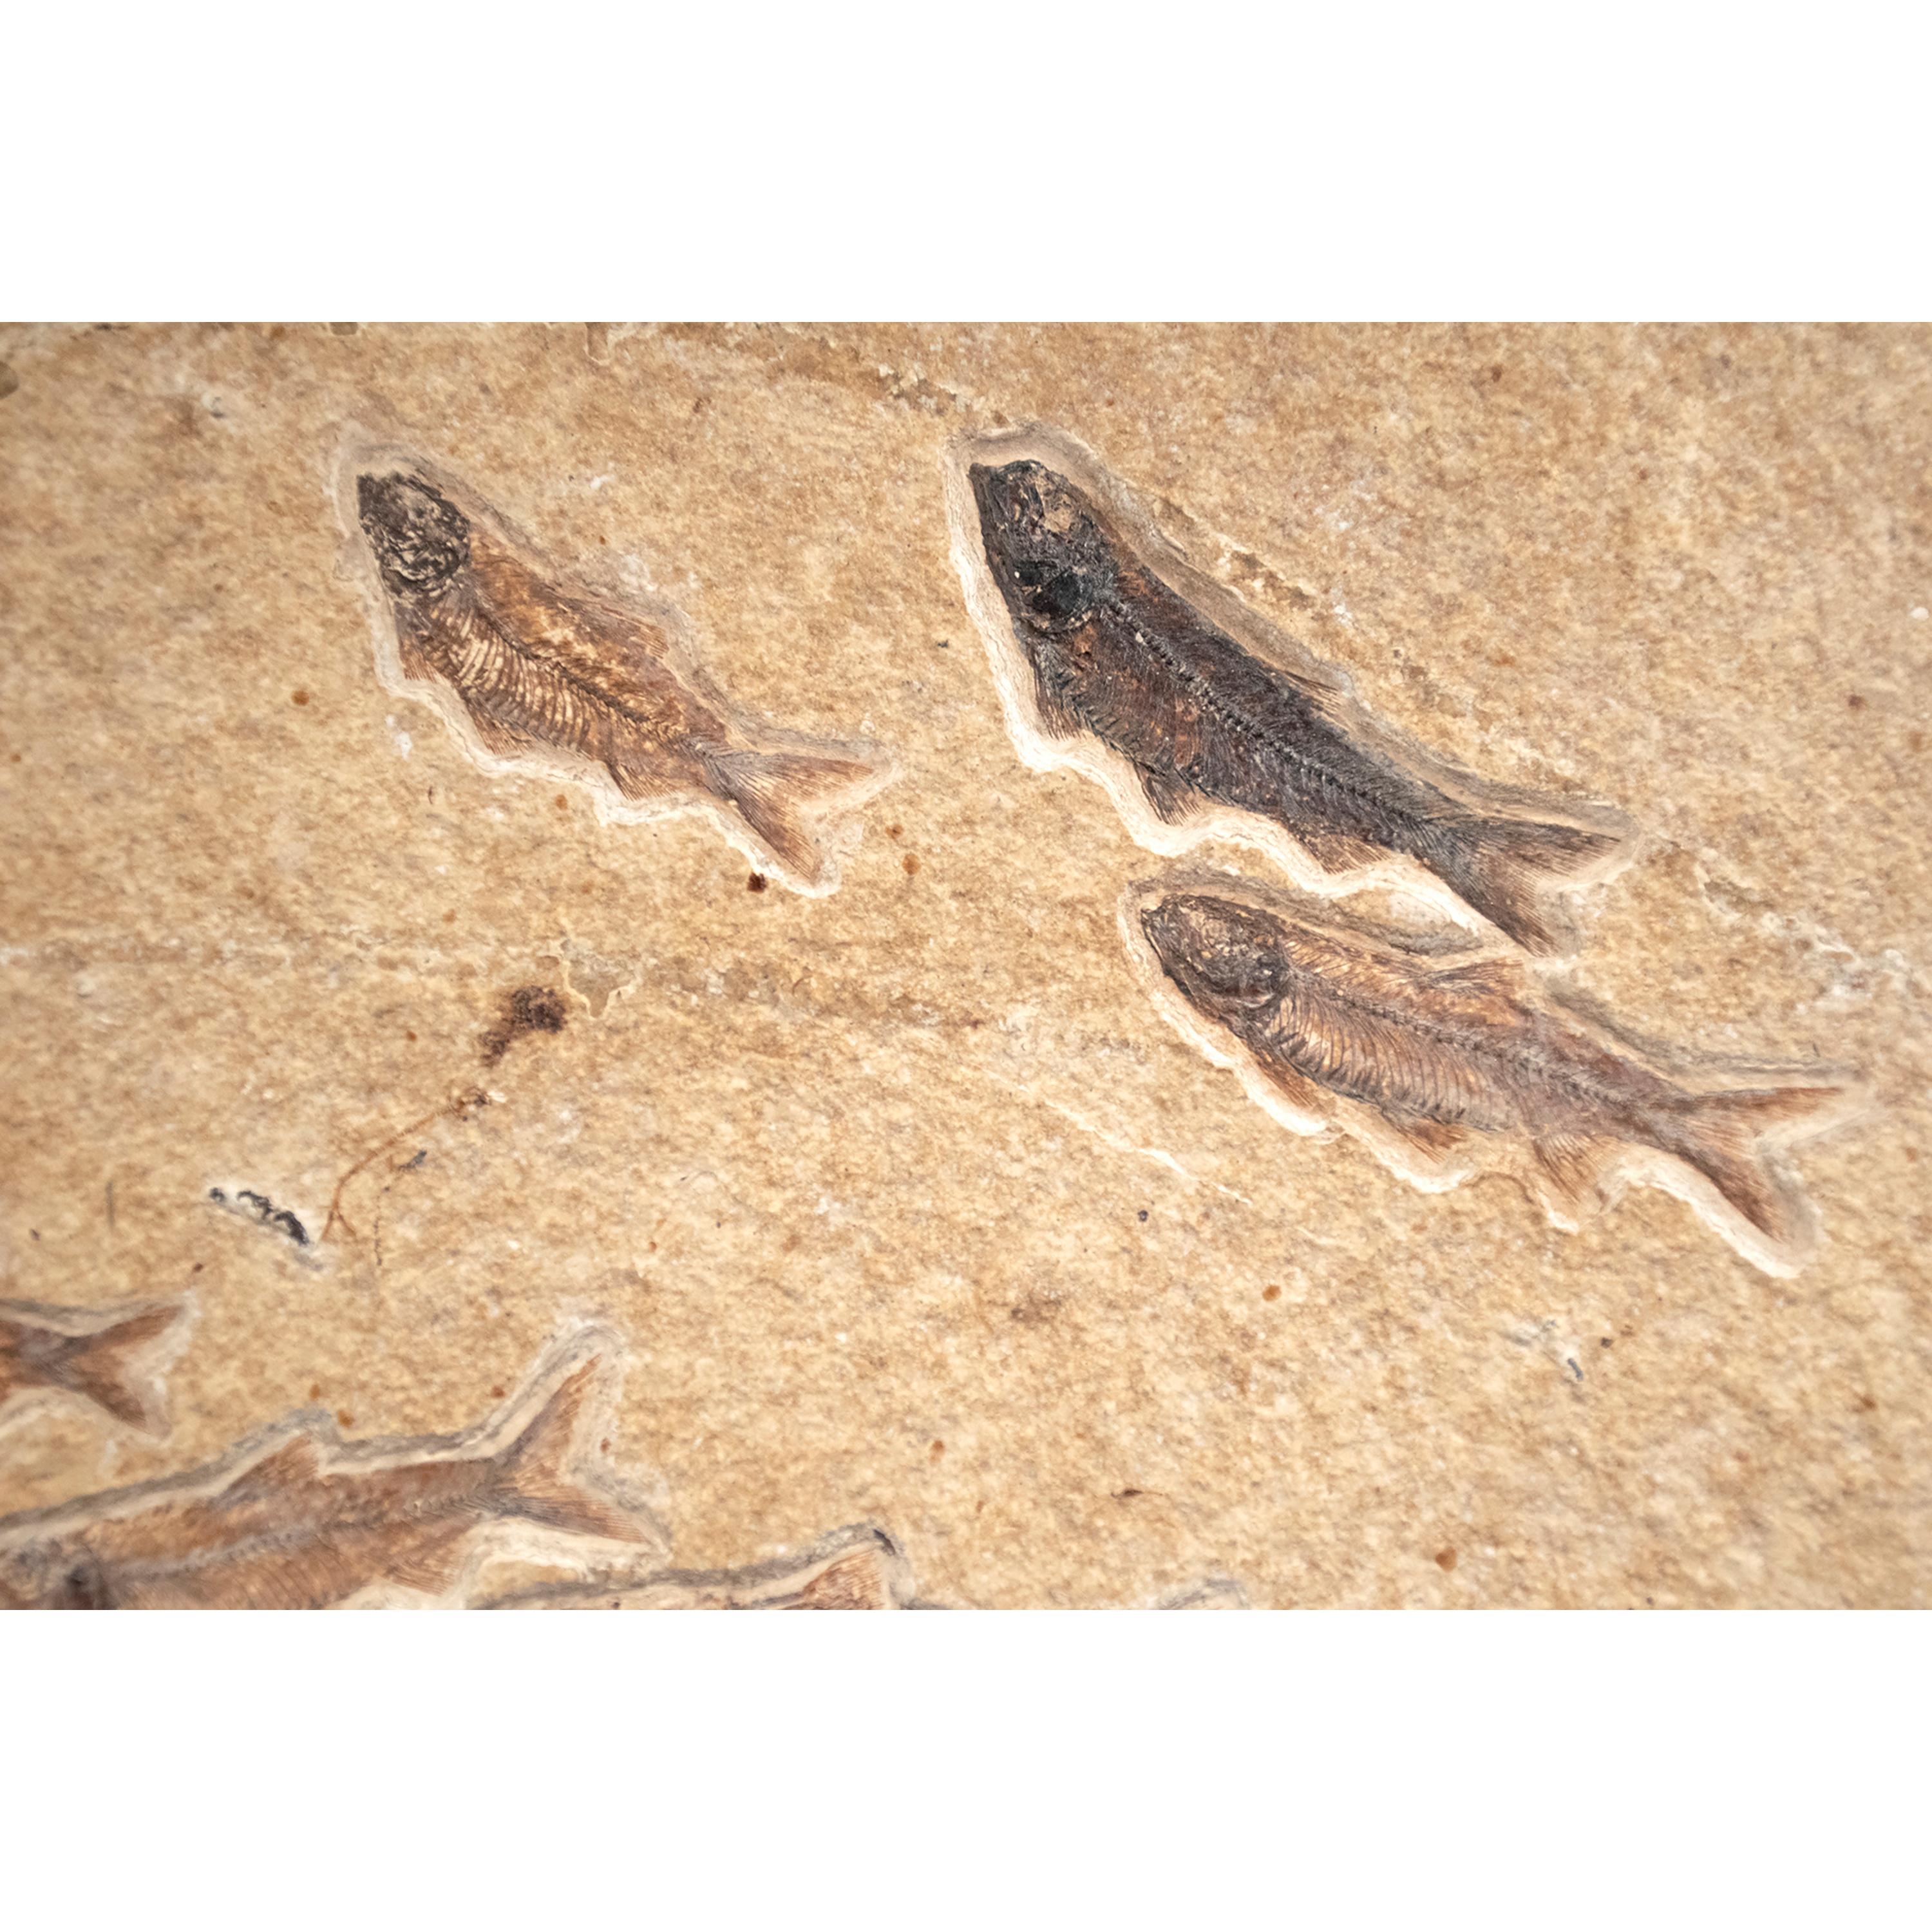 Contemporary 50 Million Year Old Eocene Era Fossil Fish Mural in Stone, from Wyoming